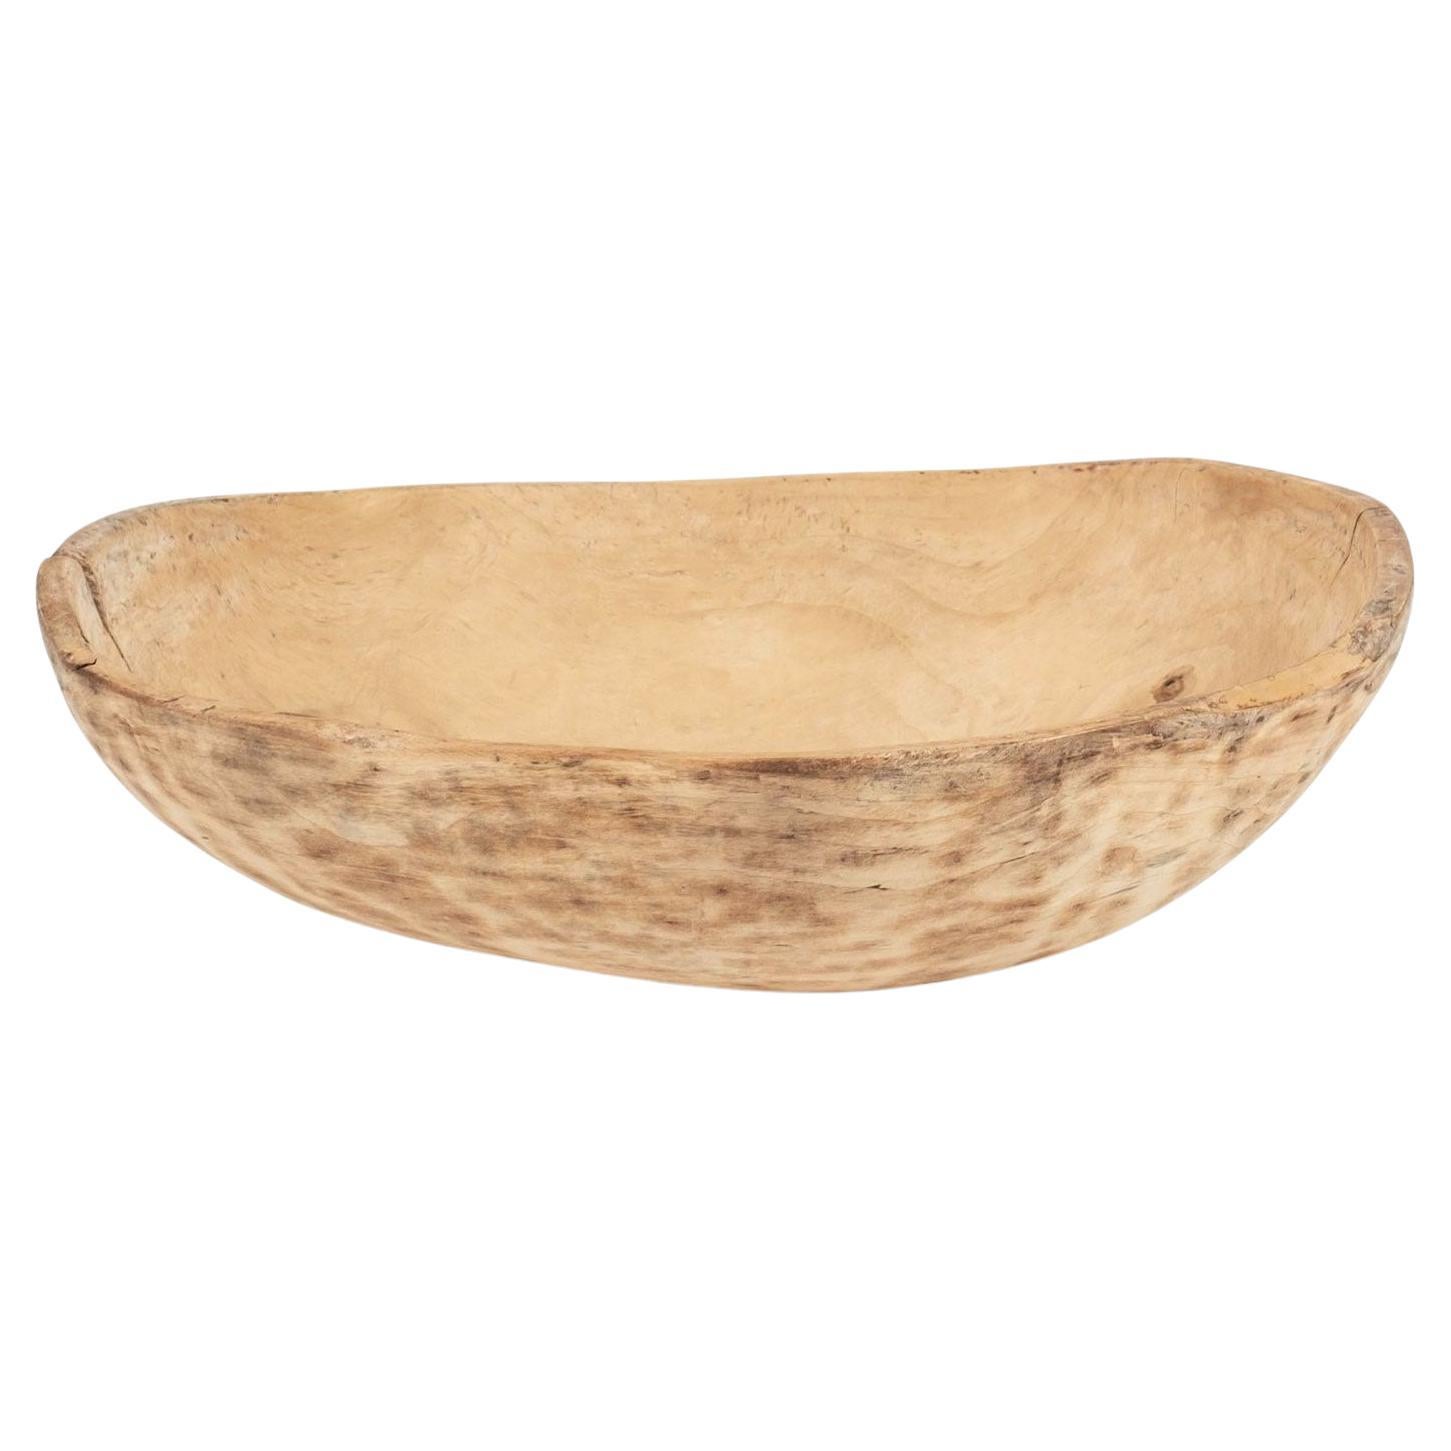 Oval-Shaped Bleached and Scrubbed Rustic Swedish Dugout Bowl For Sale